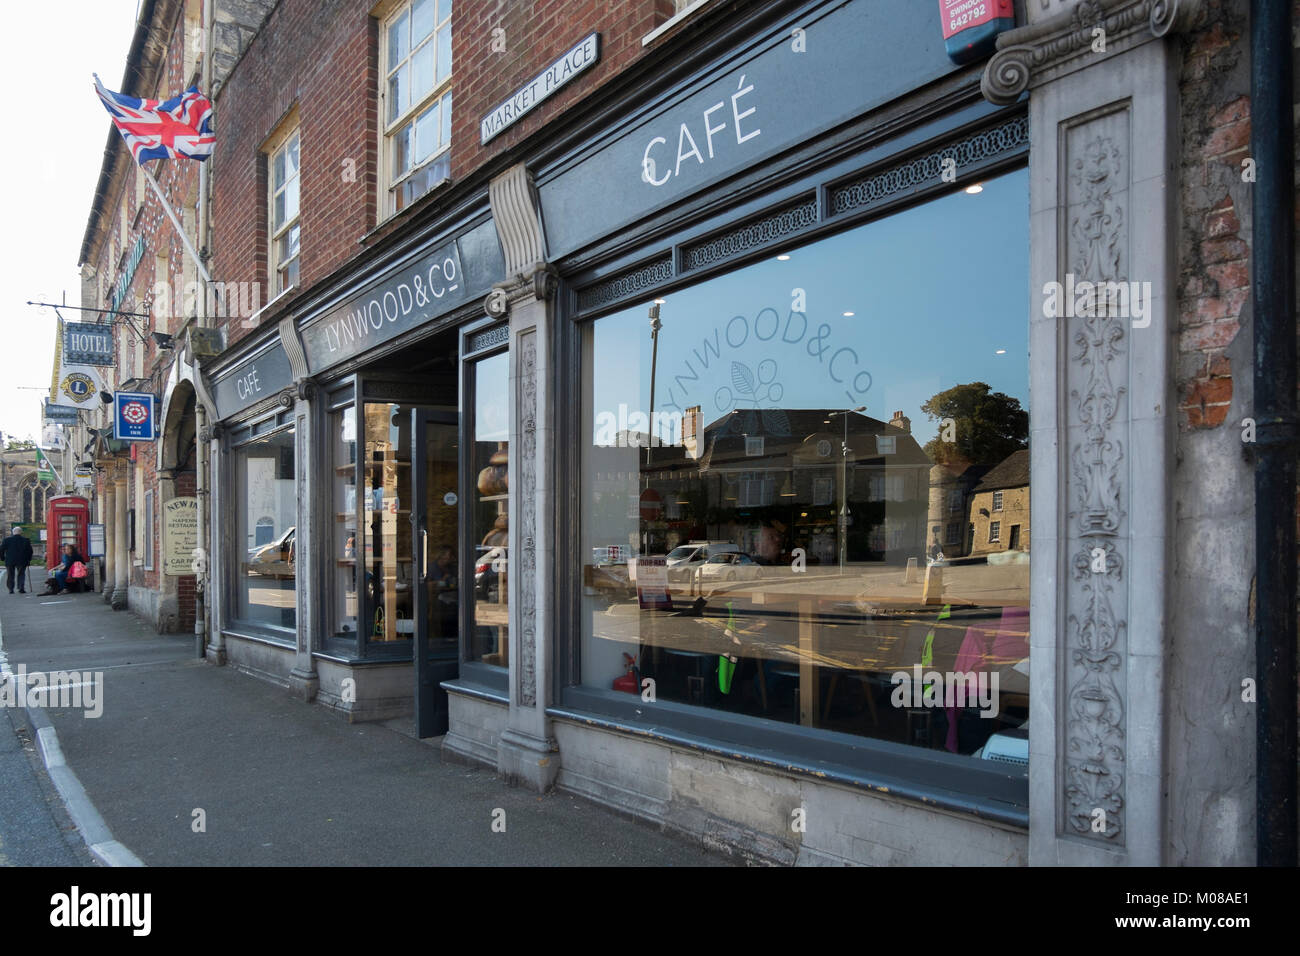 Lynwood & Co cafe nella piazza del mercato di Lechlade in Cotswolds, Gloucestershire, UK. Foto Stock